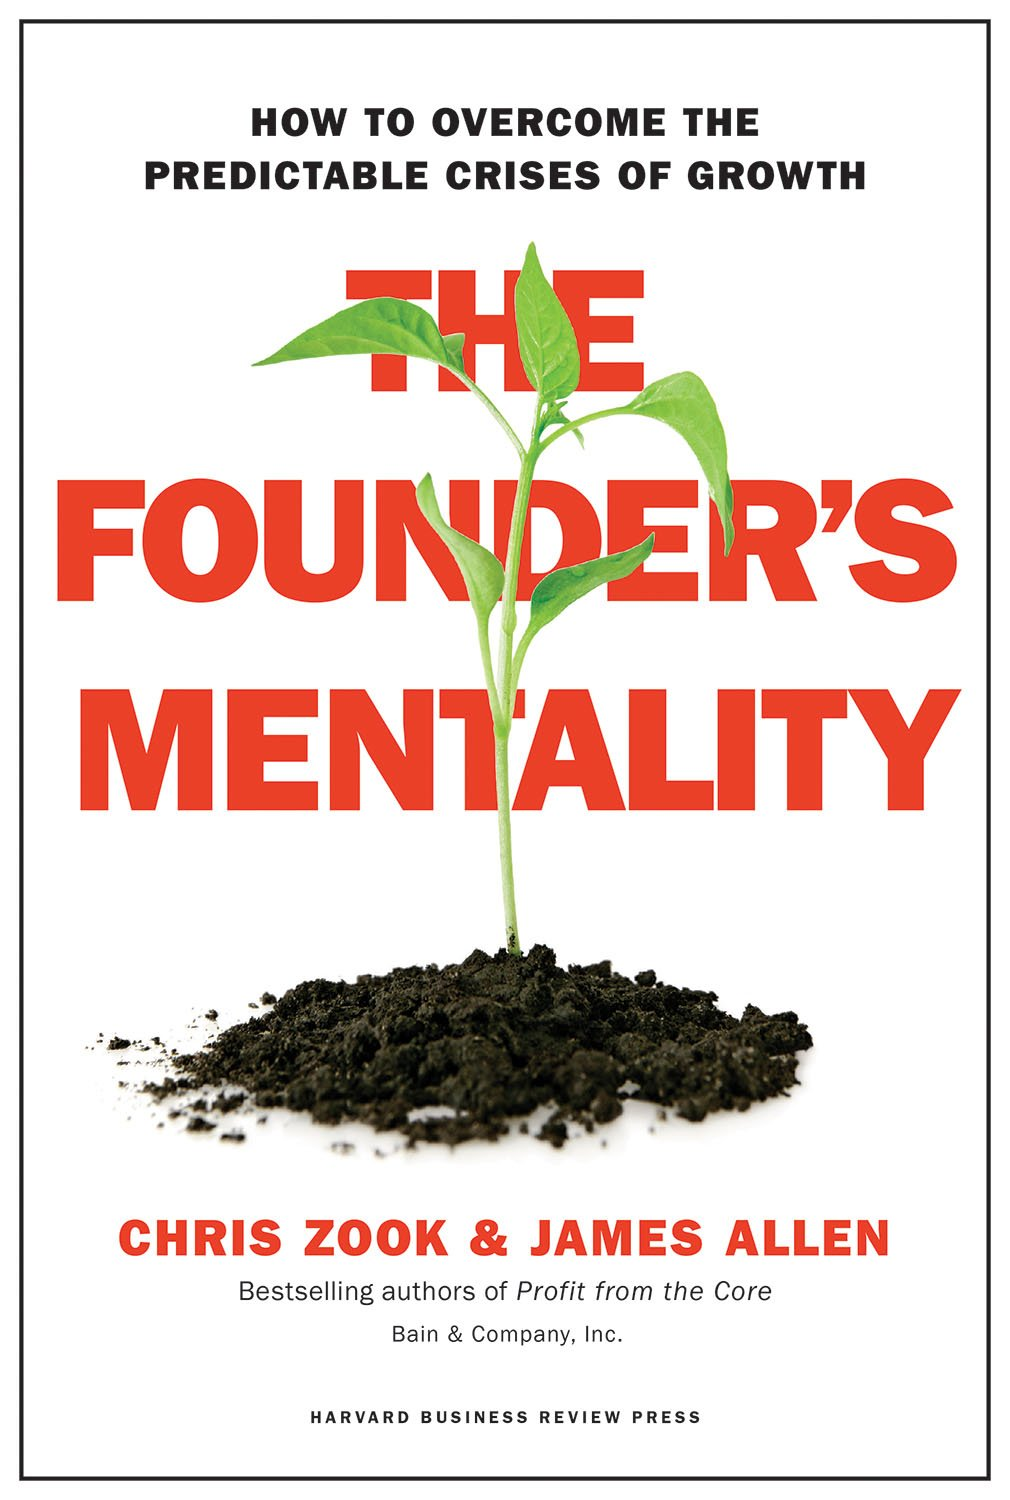 Libro 'The Founder's Mentality'